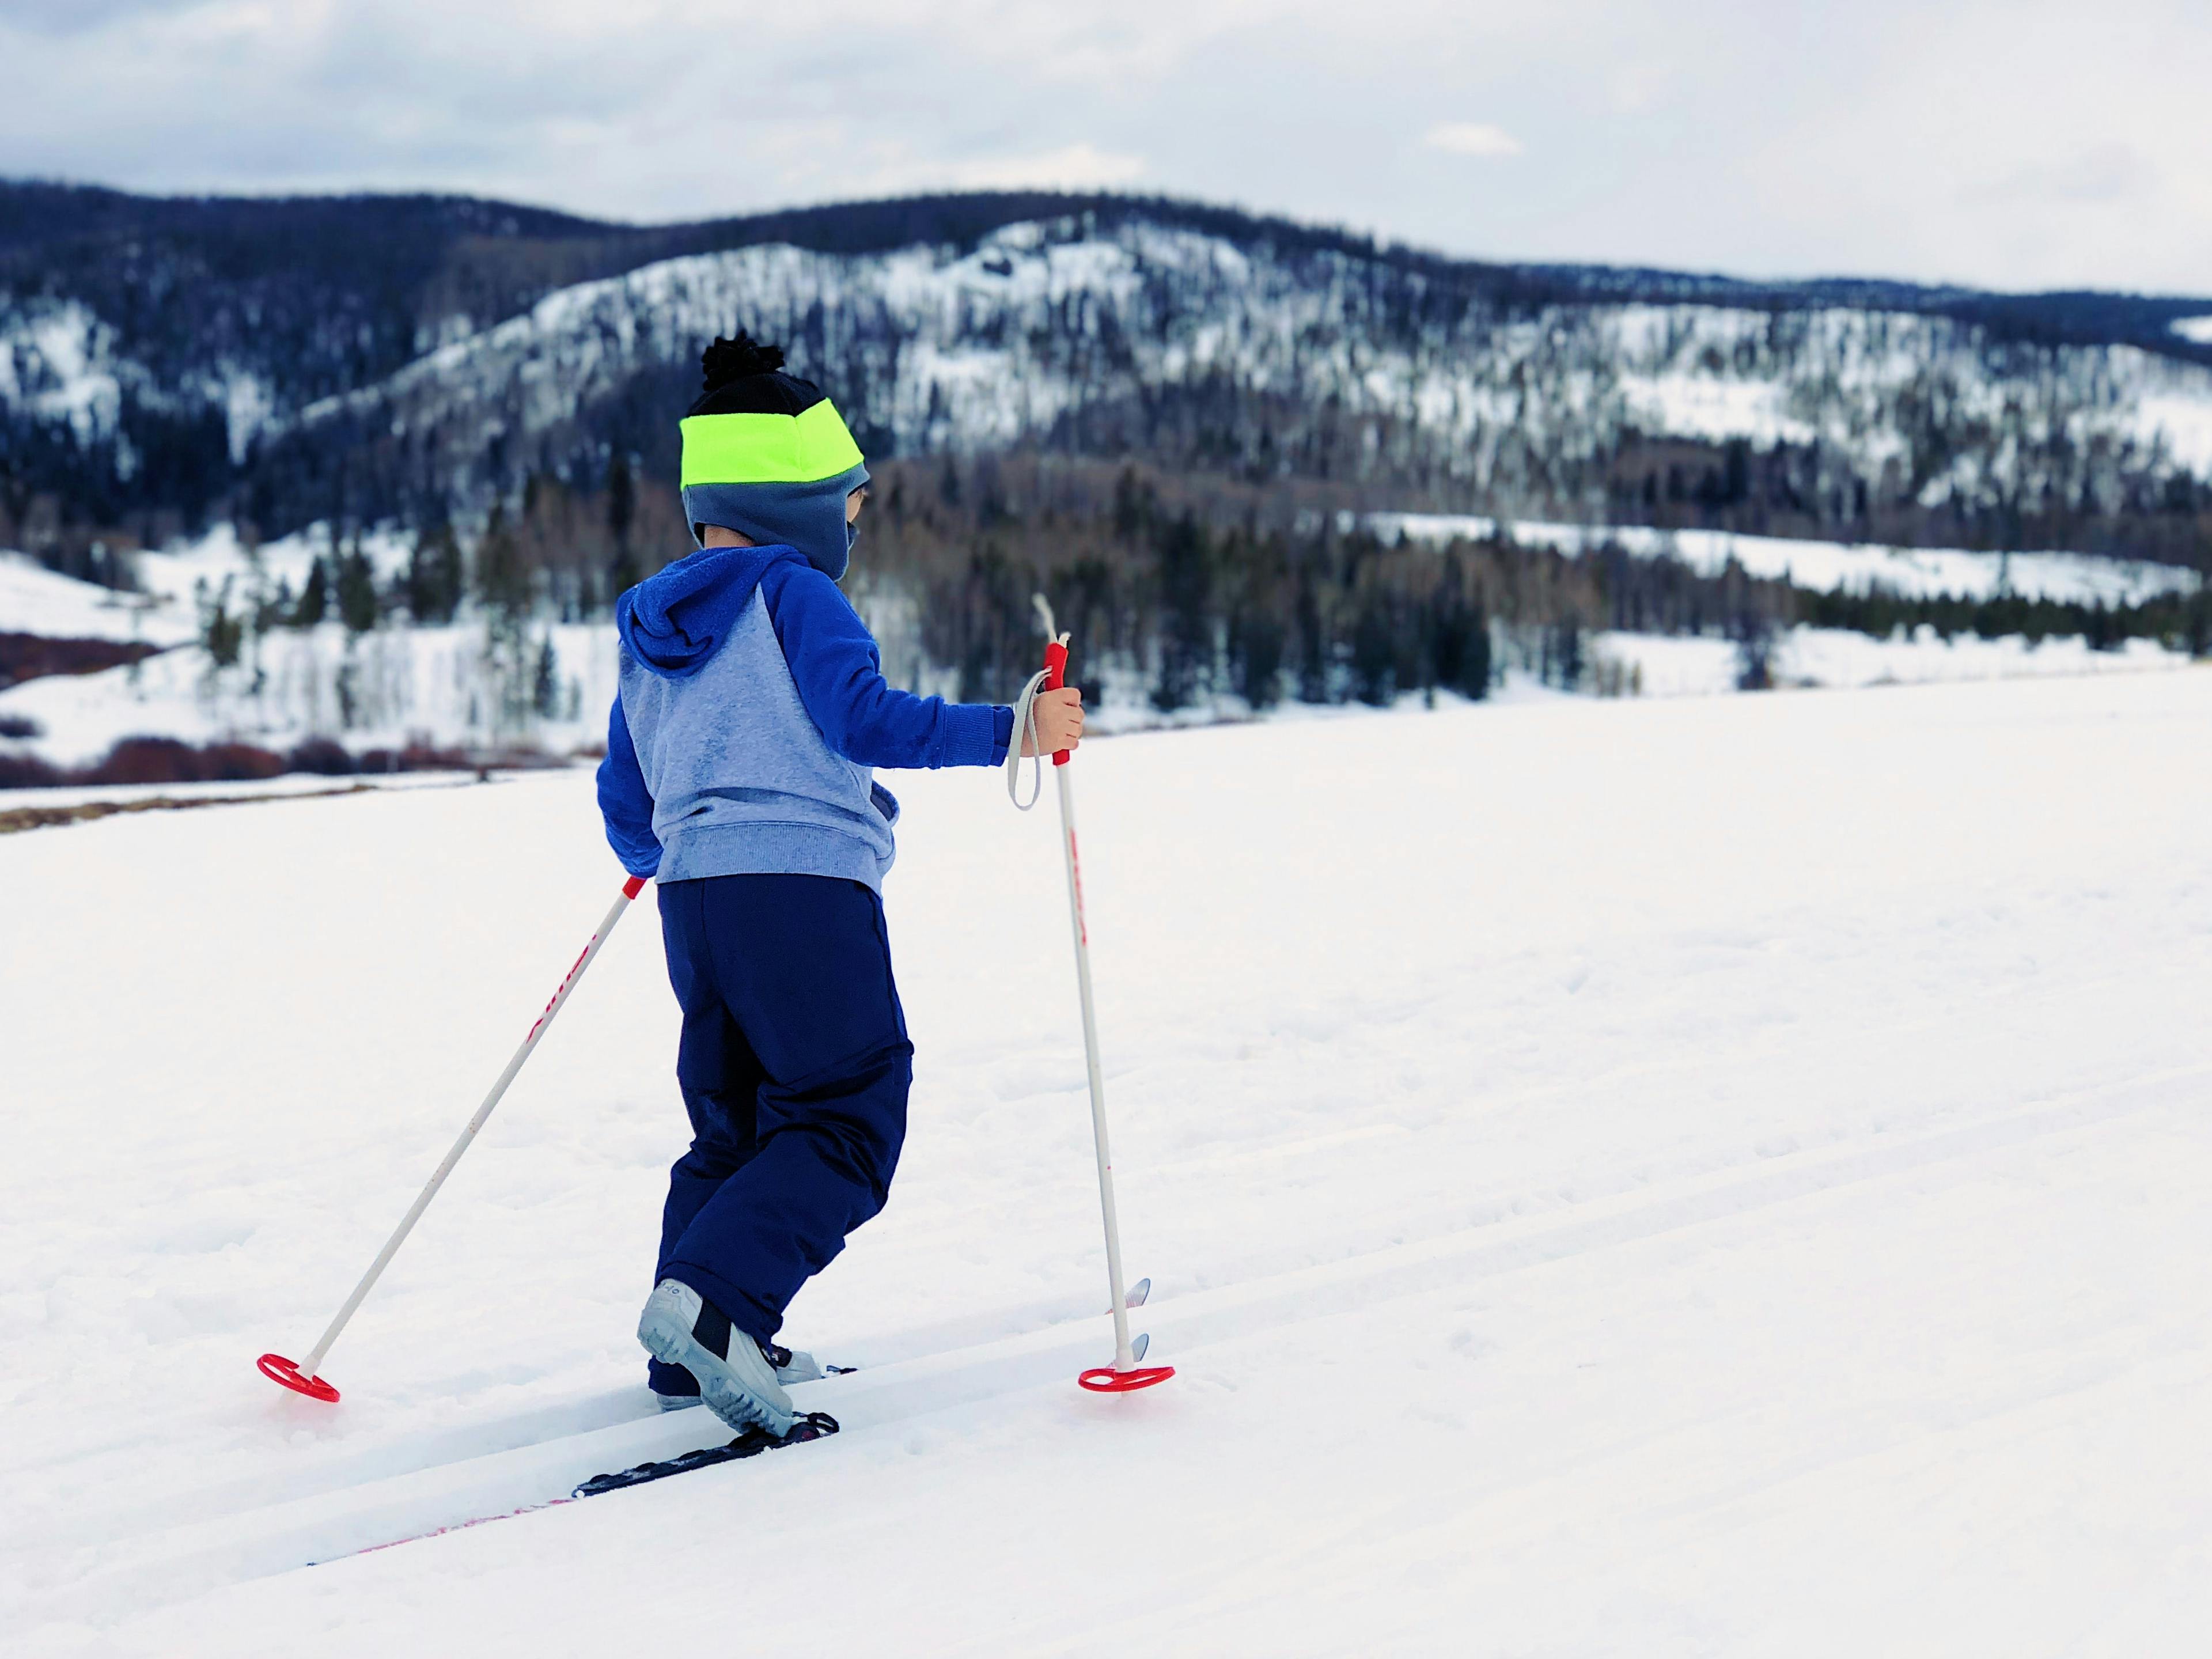 Child cross country skiing on holiday